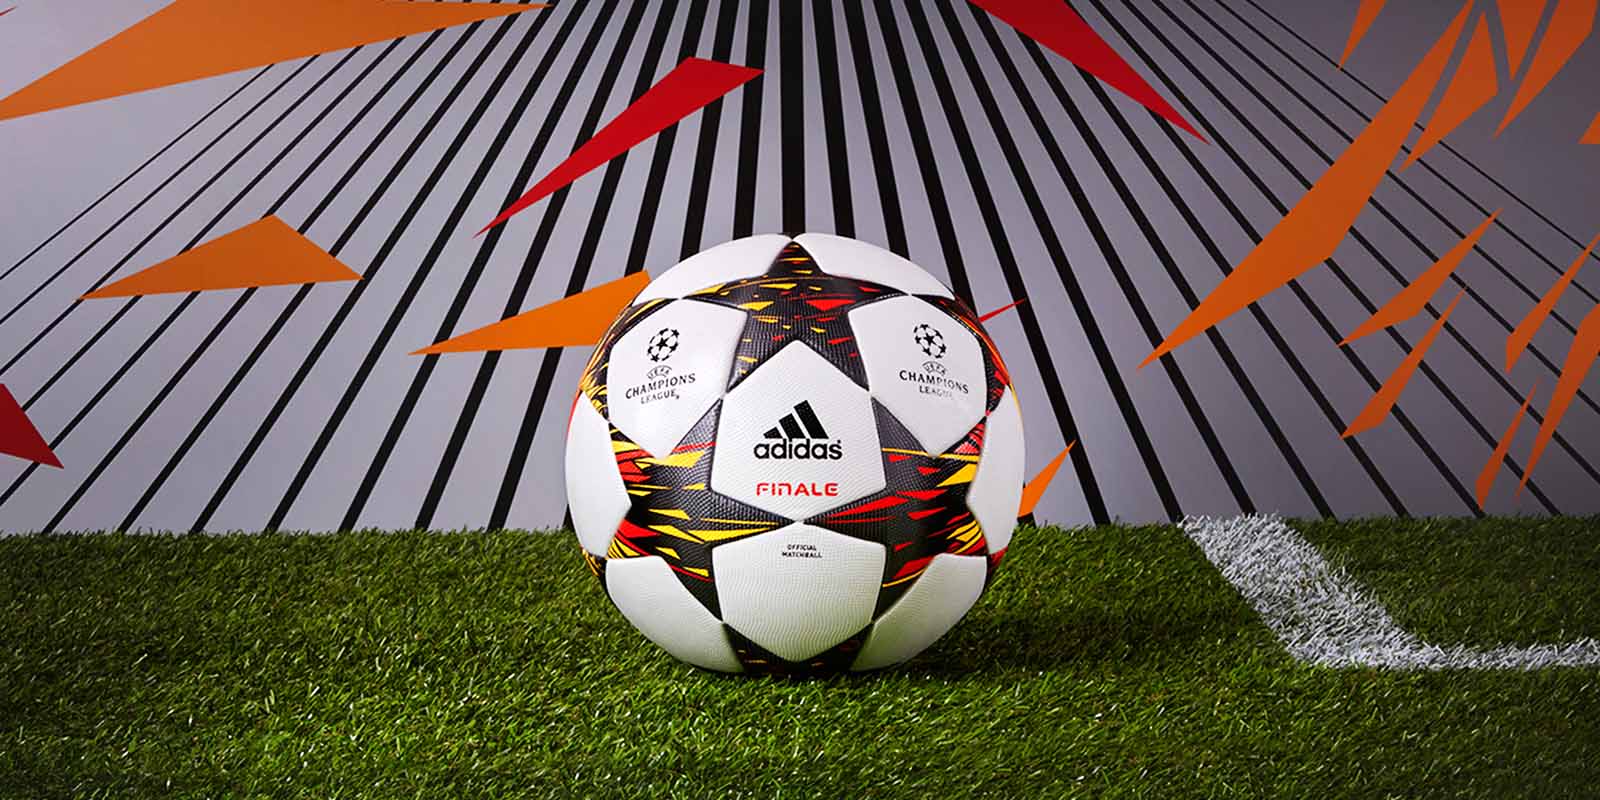 Footy News: ADIDAS FINALE 14 14-15 CHAMPIONS LEAGUE BALL ...